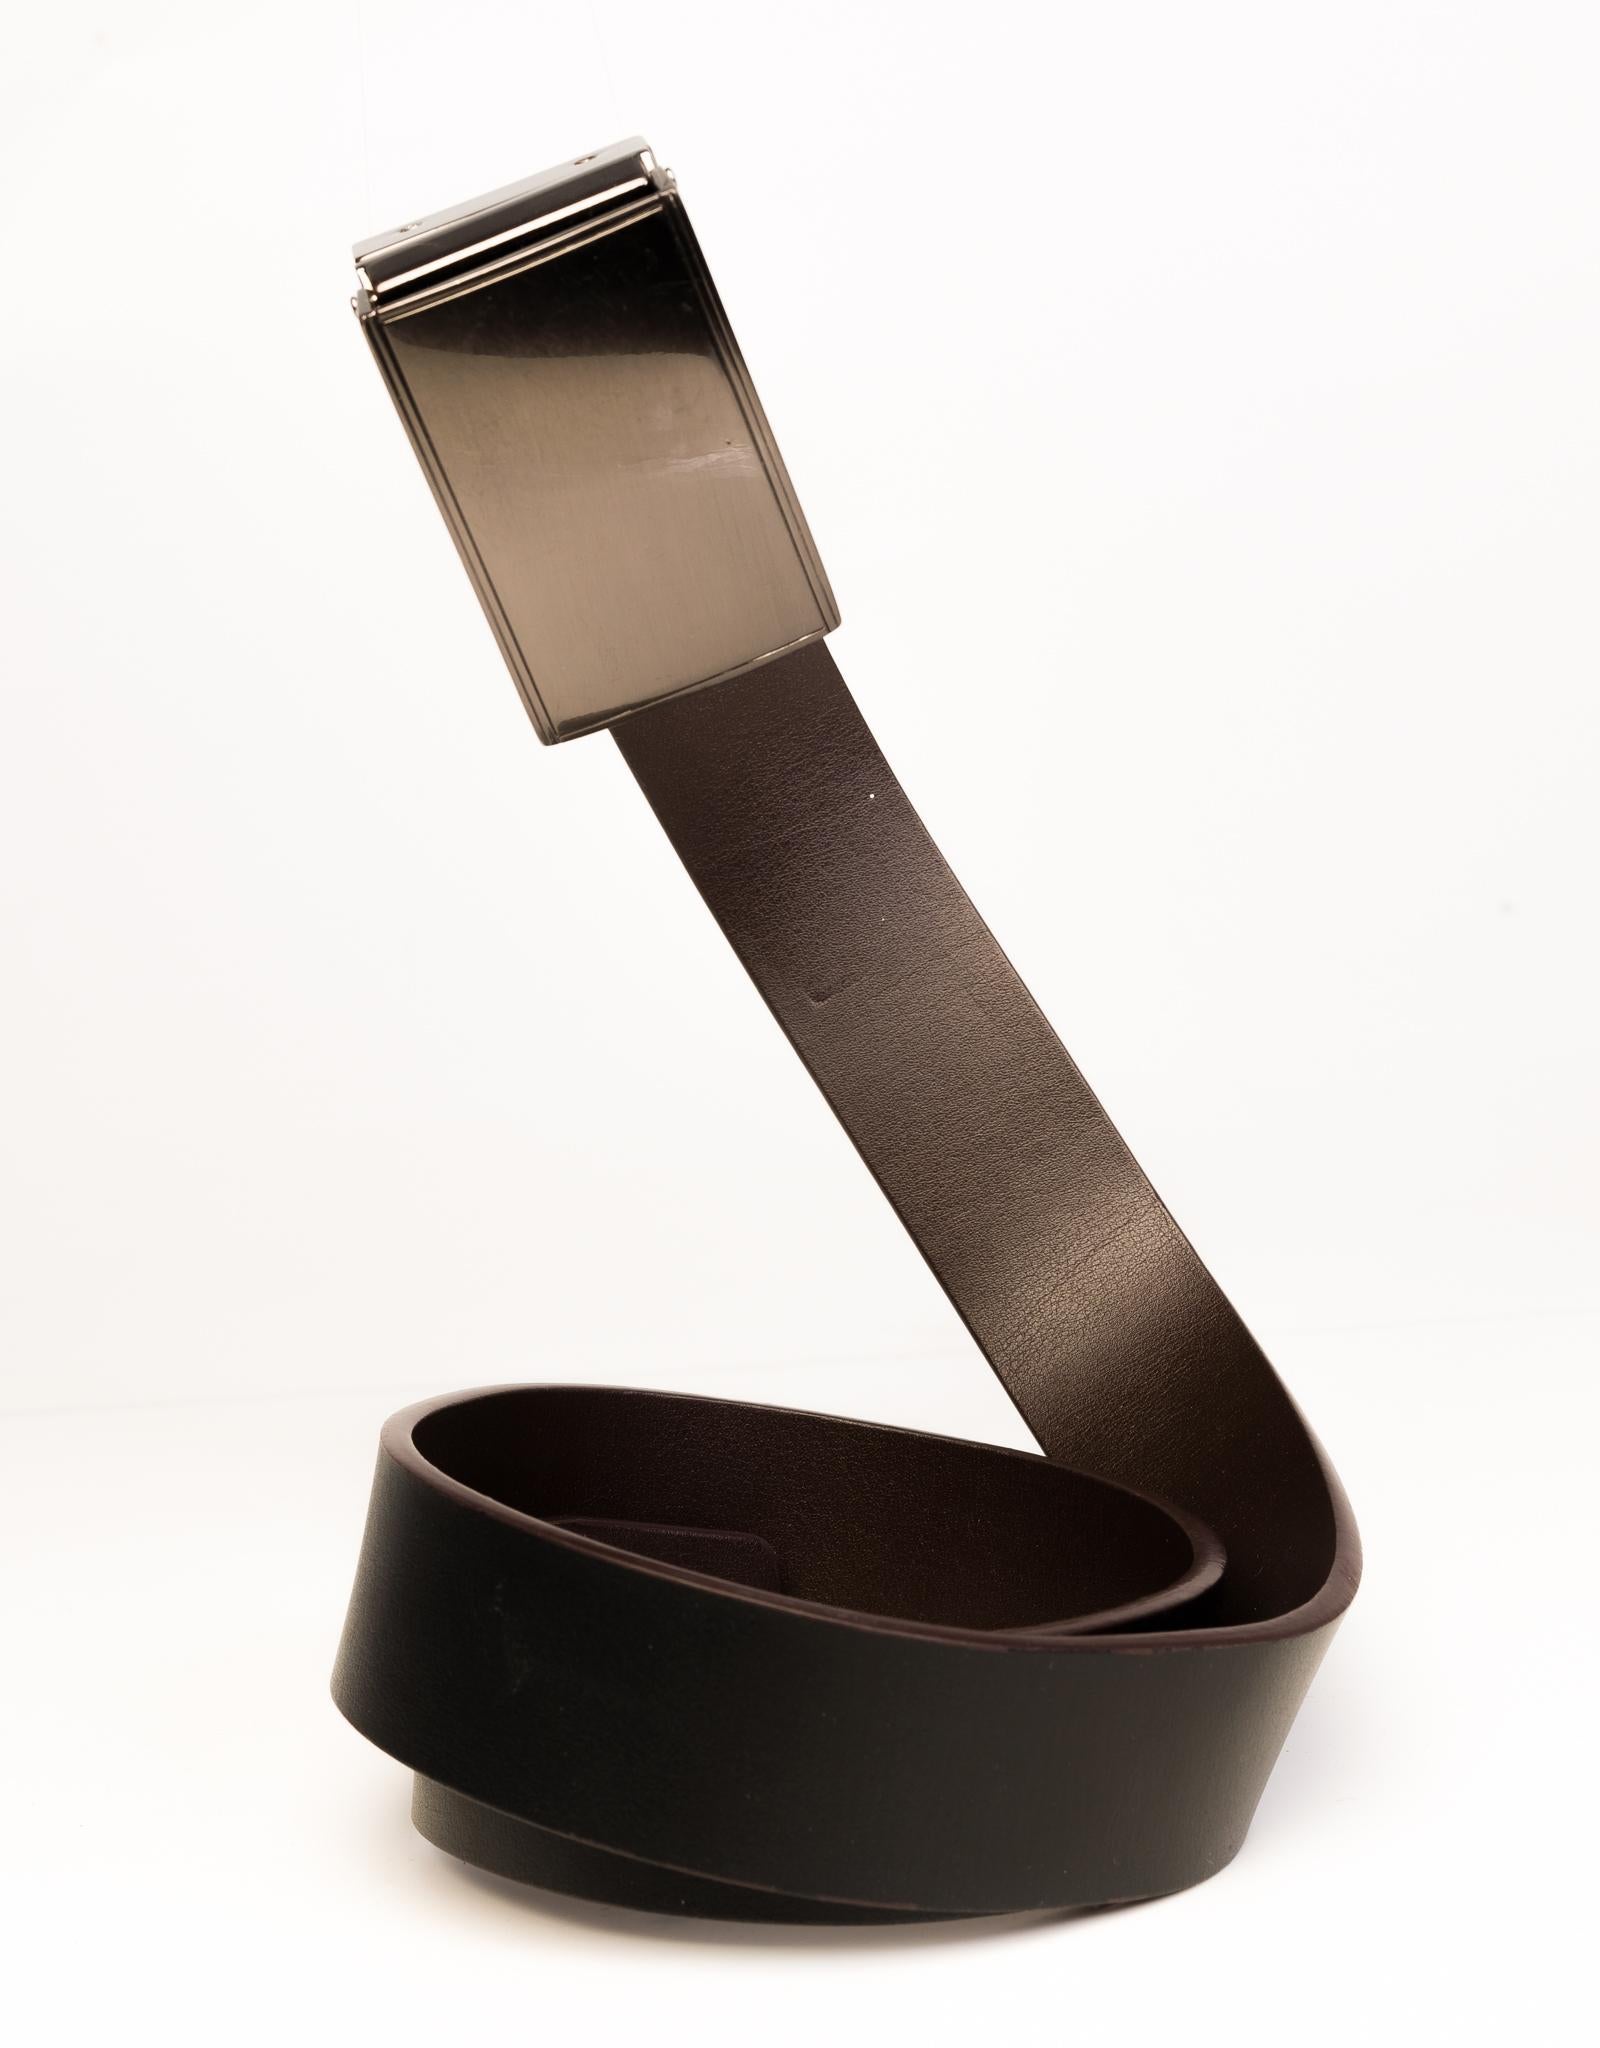 Black leather Dsquared2 belt with a silver-tone lifting buckle.

COLOR: Black
MATERIAL: Leather
MEASURES: L 35” x 1”
COMES WITH: Dust bag
CONDITION: Fair - the leather is separating in one area and the belt shows signs of